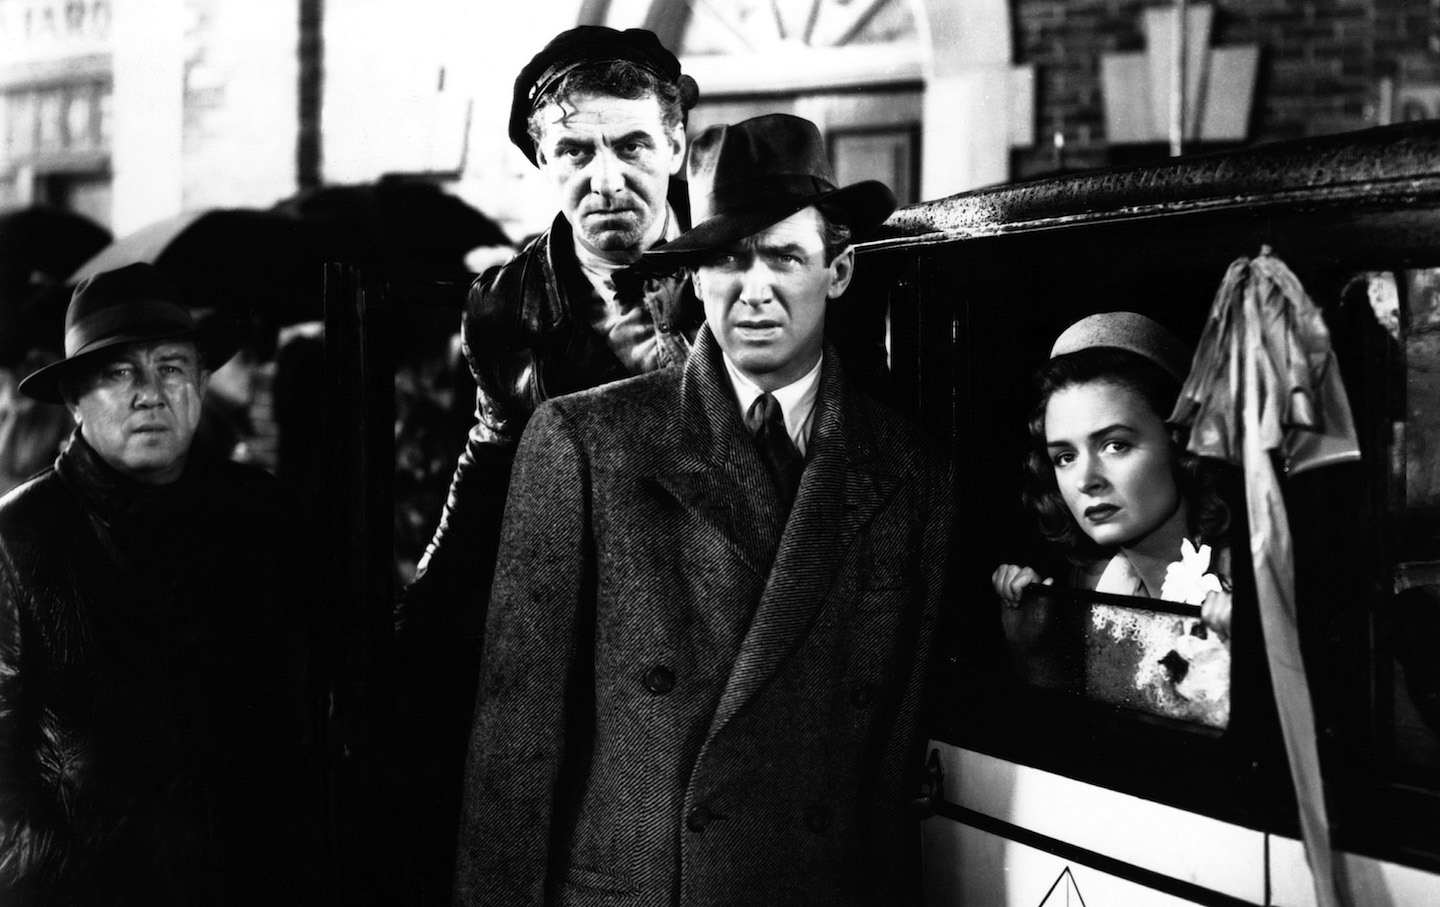 That Time the FBI Scrutinized “It’s a Wonderful Life” for Communist Messaging